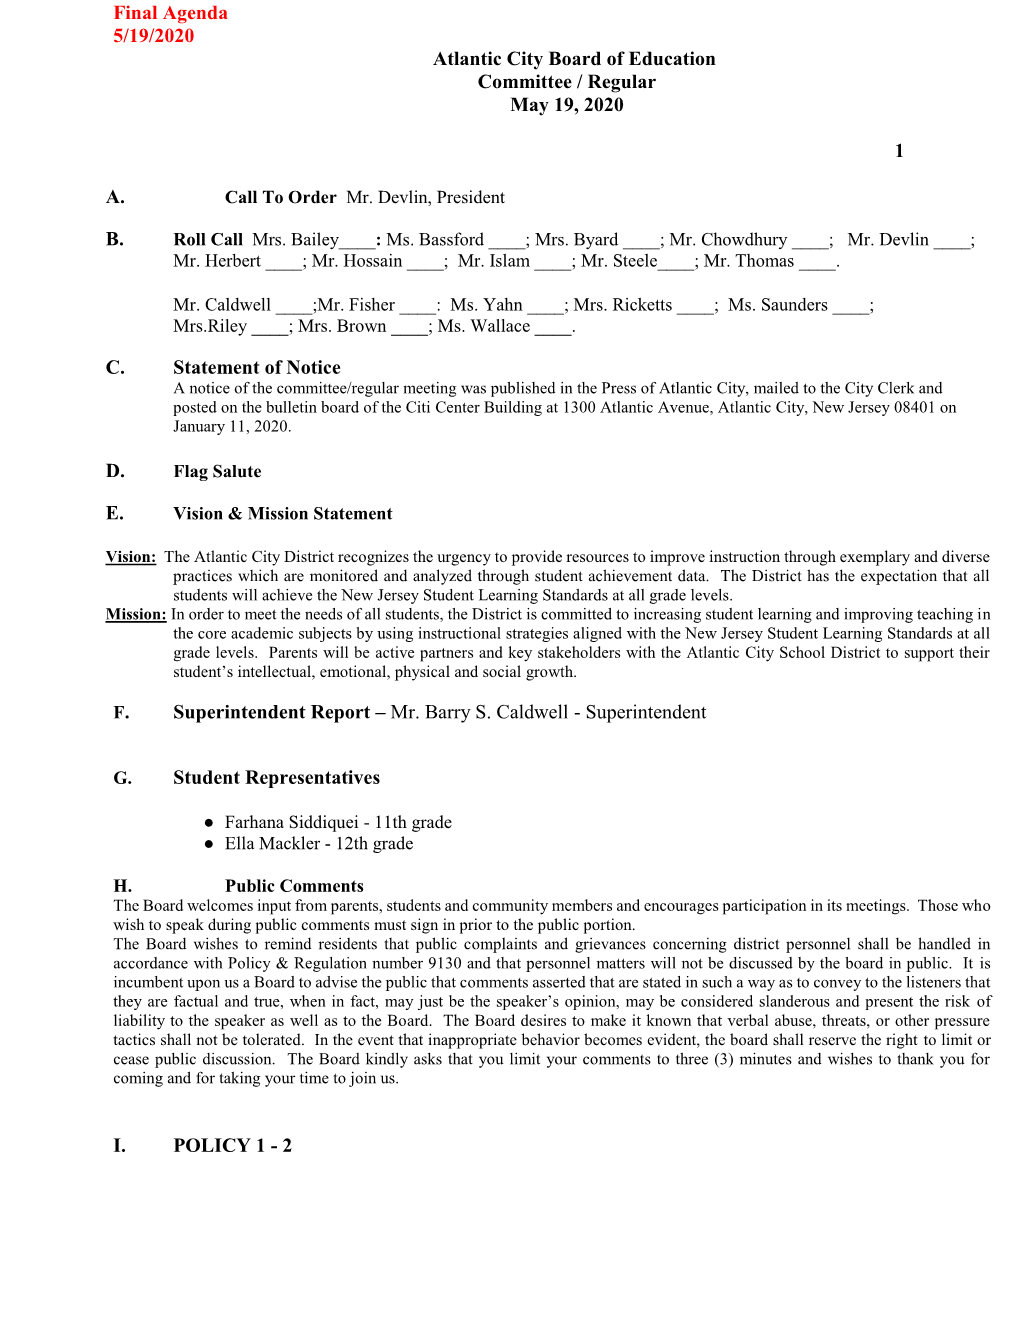 Final Agenda 5/19/2020 Atlantic City Board of Education Committee / Regular May 19, 2020 1 A. C. Statement of Notice D. E